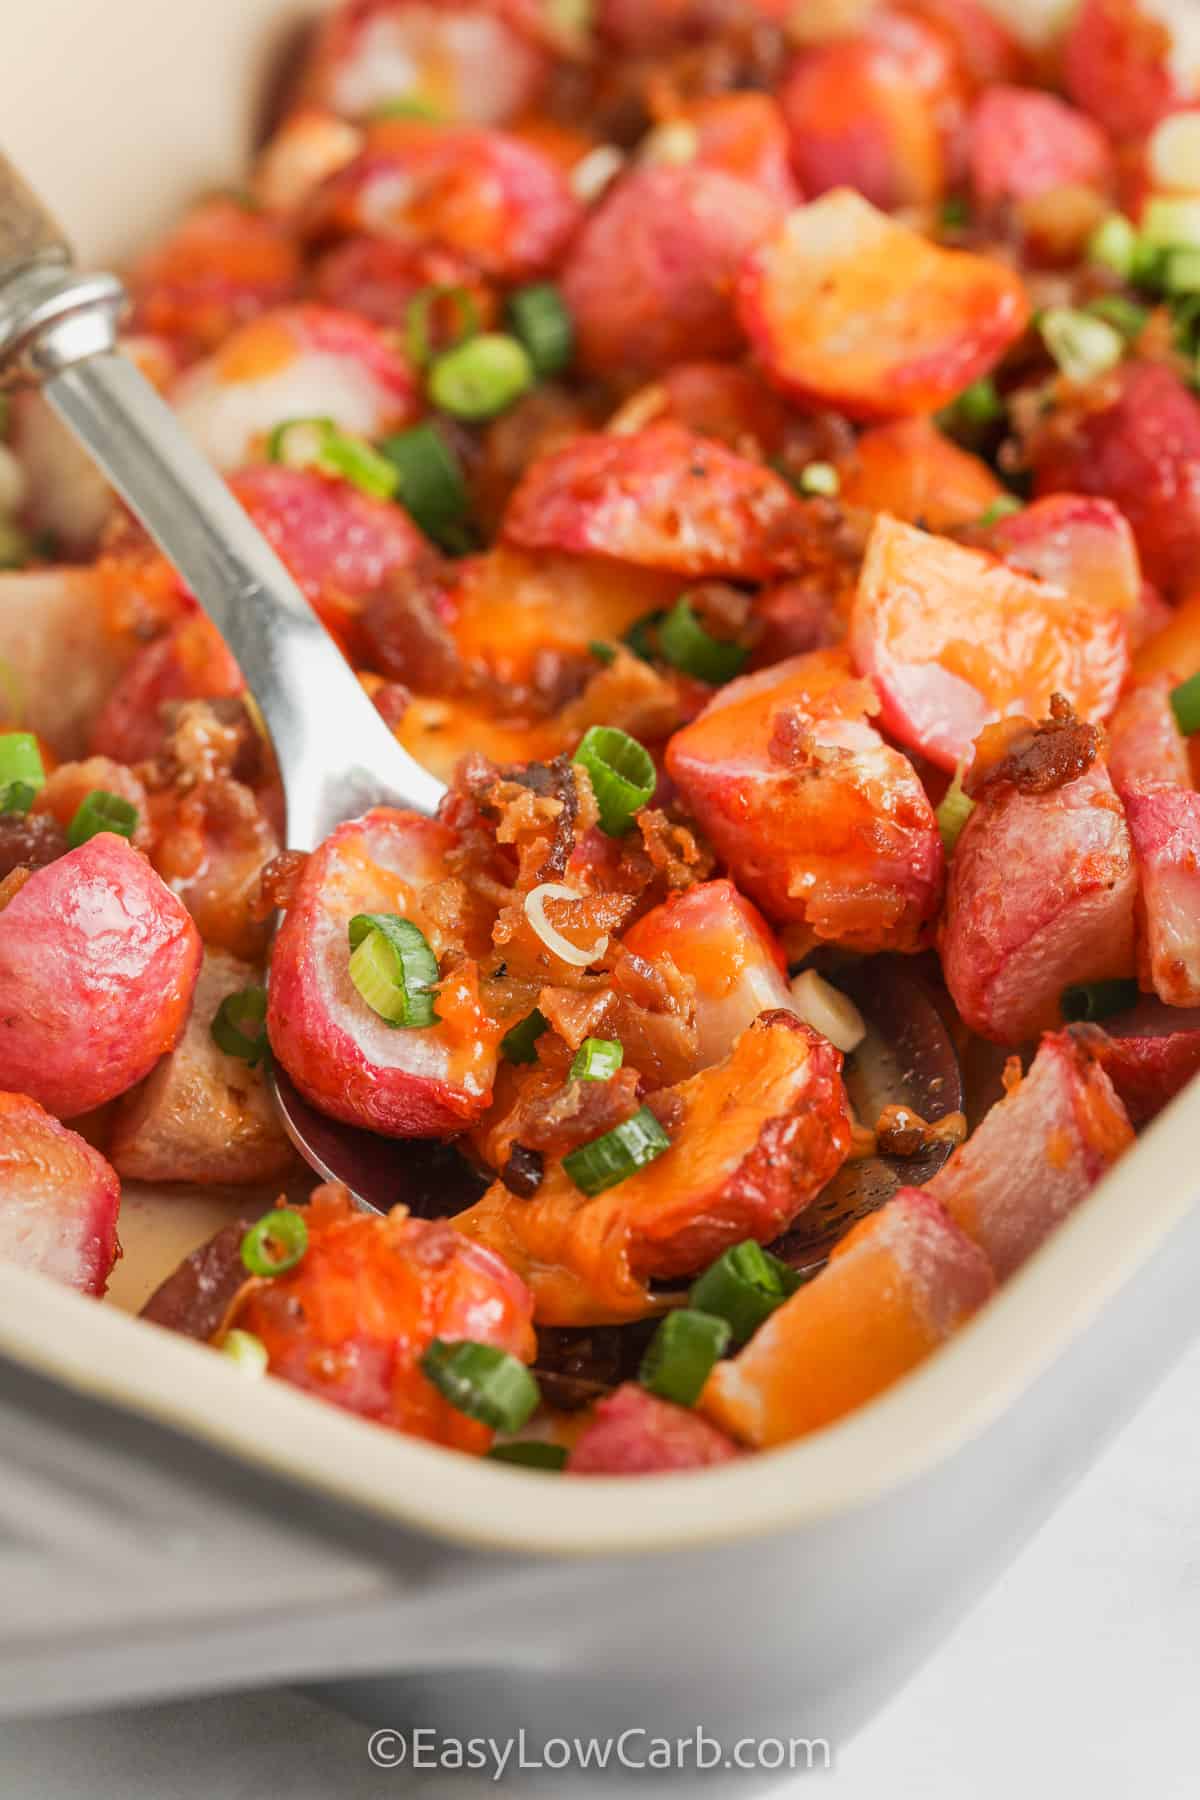 Loaded Baked Radishes Casserole in the dish with a spoon